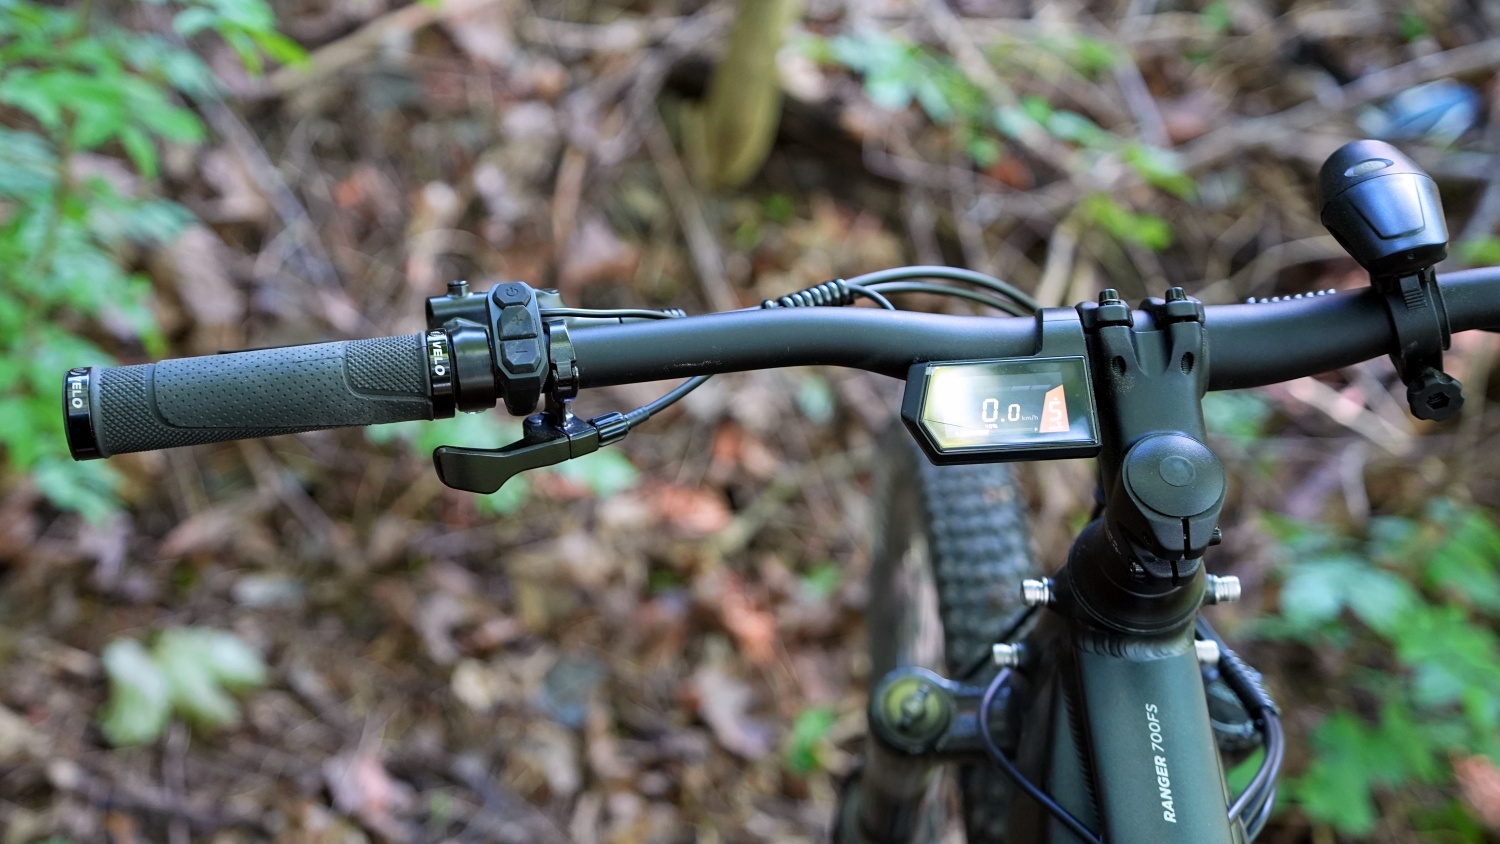 The handlebar contains all sorts of stuff, like a dropper lever, display, handlebar remote and lamp.